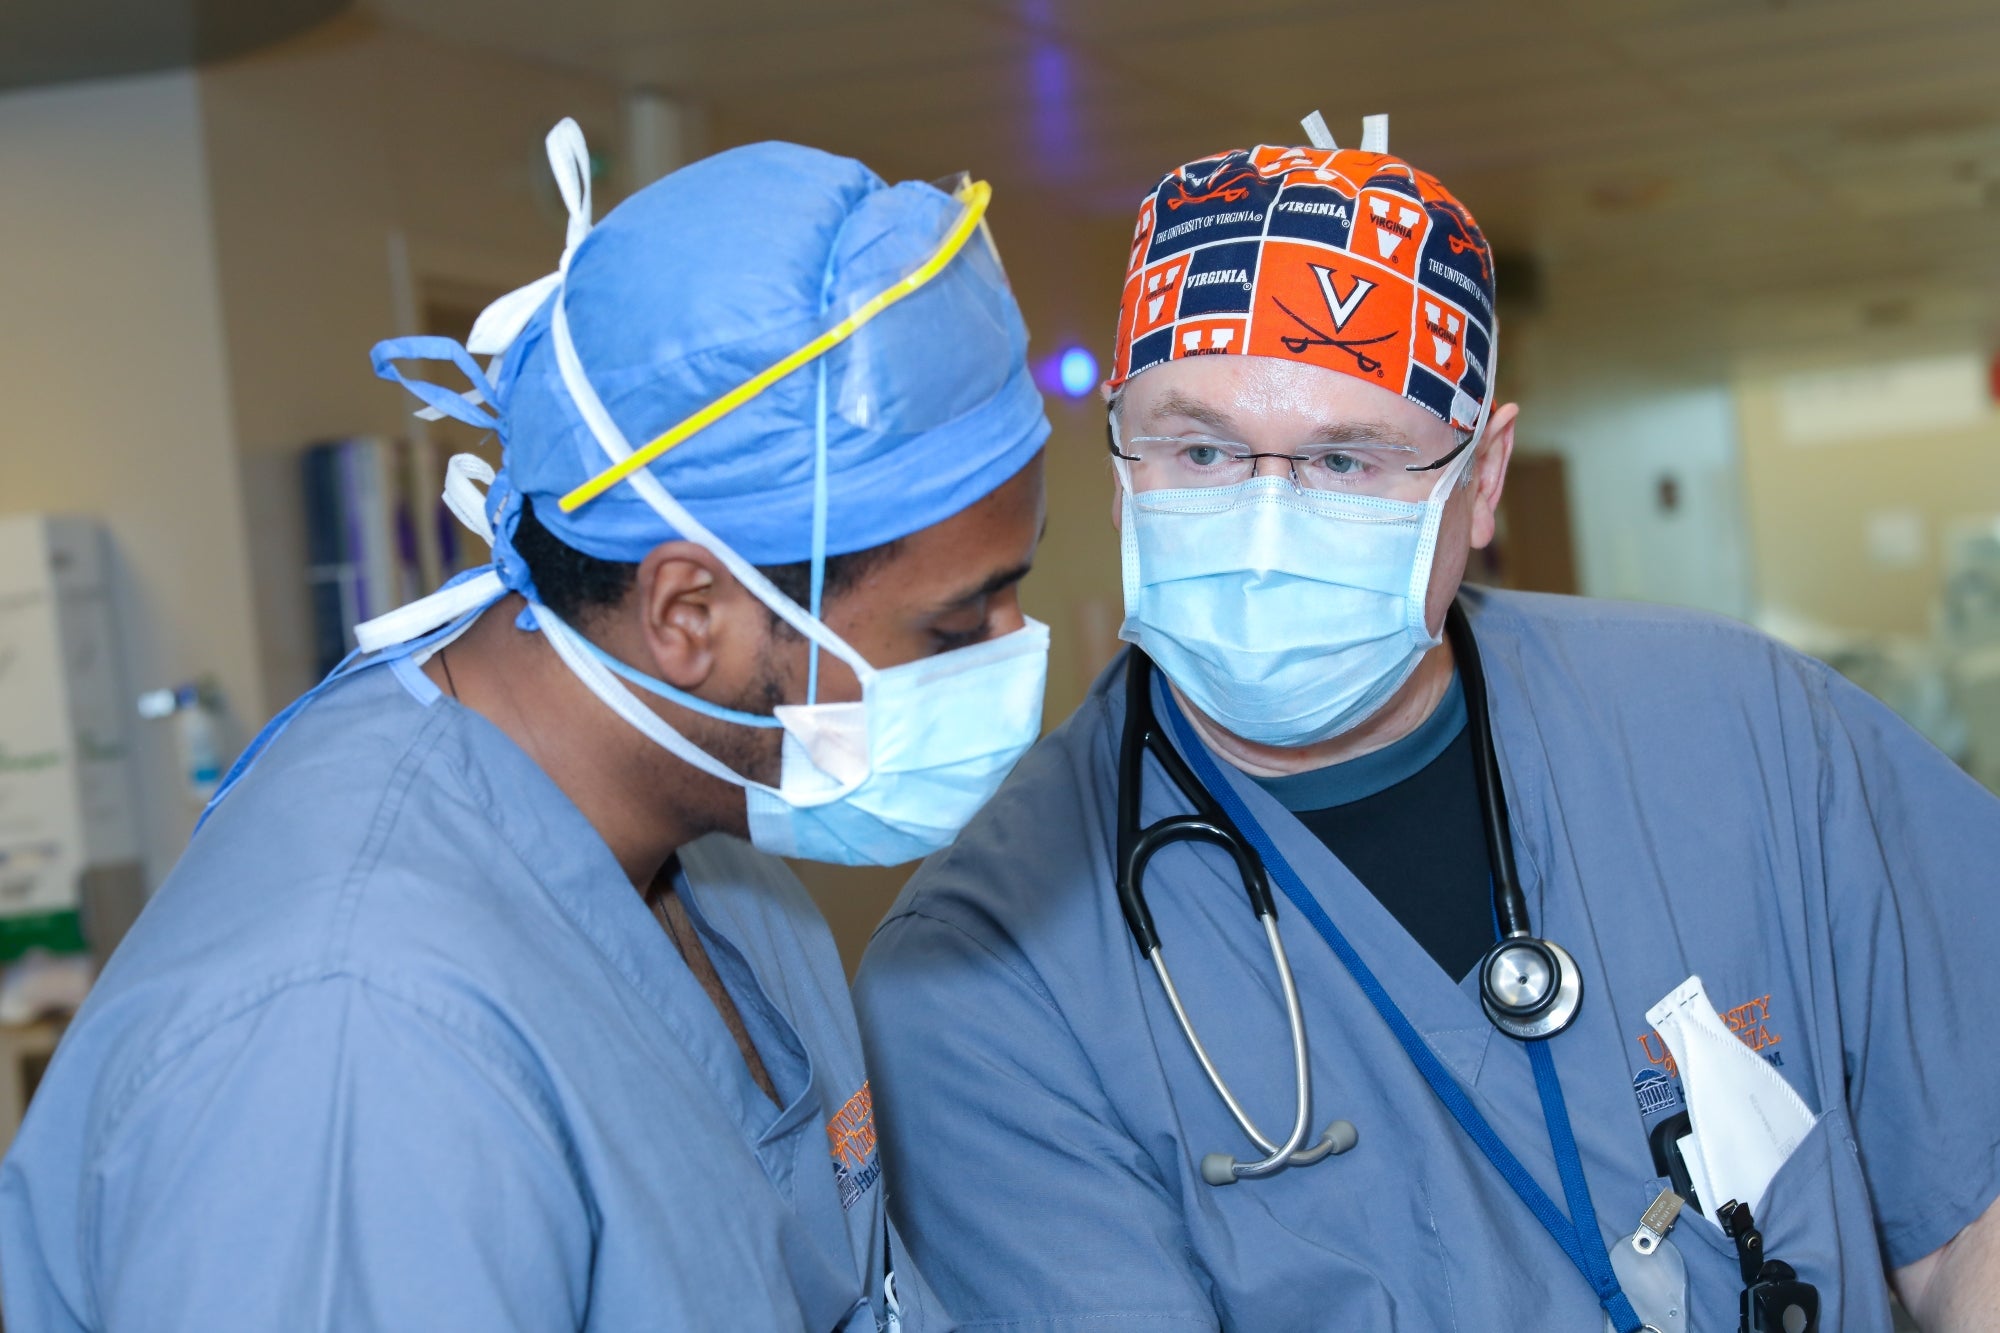 University of Virginia Anesthesia Doctor teaches the trainees